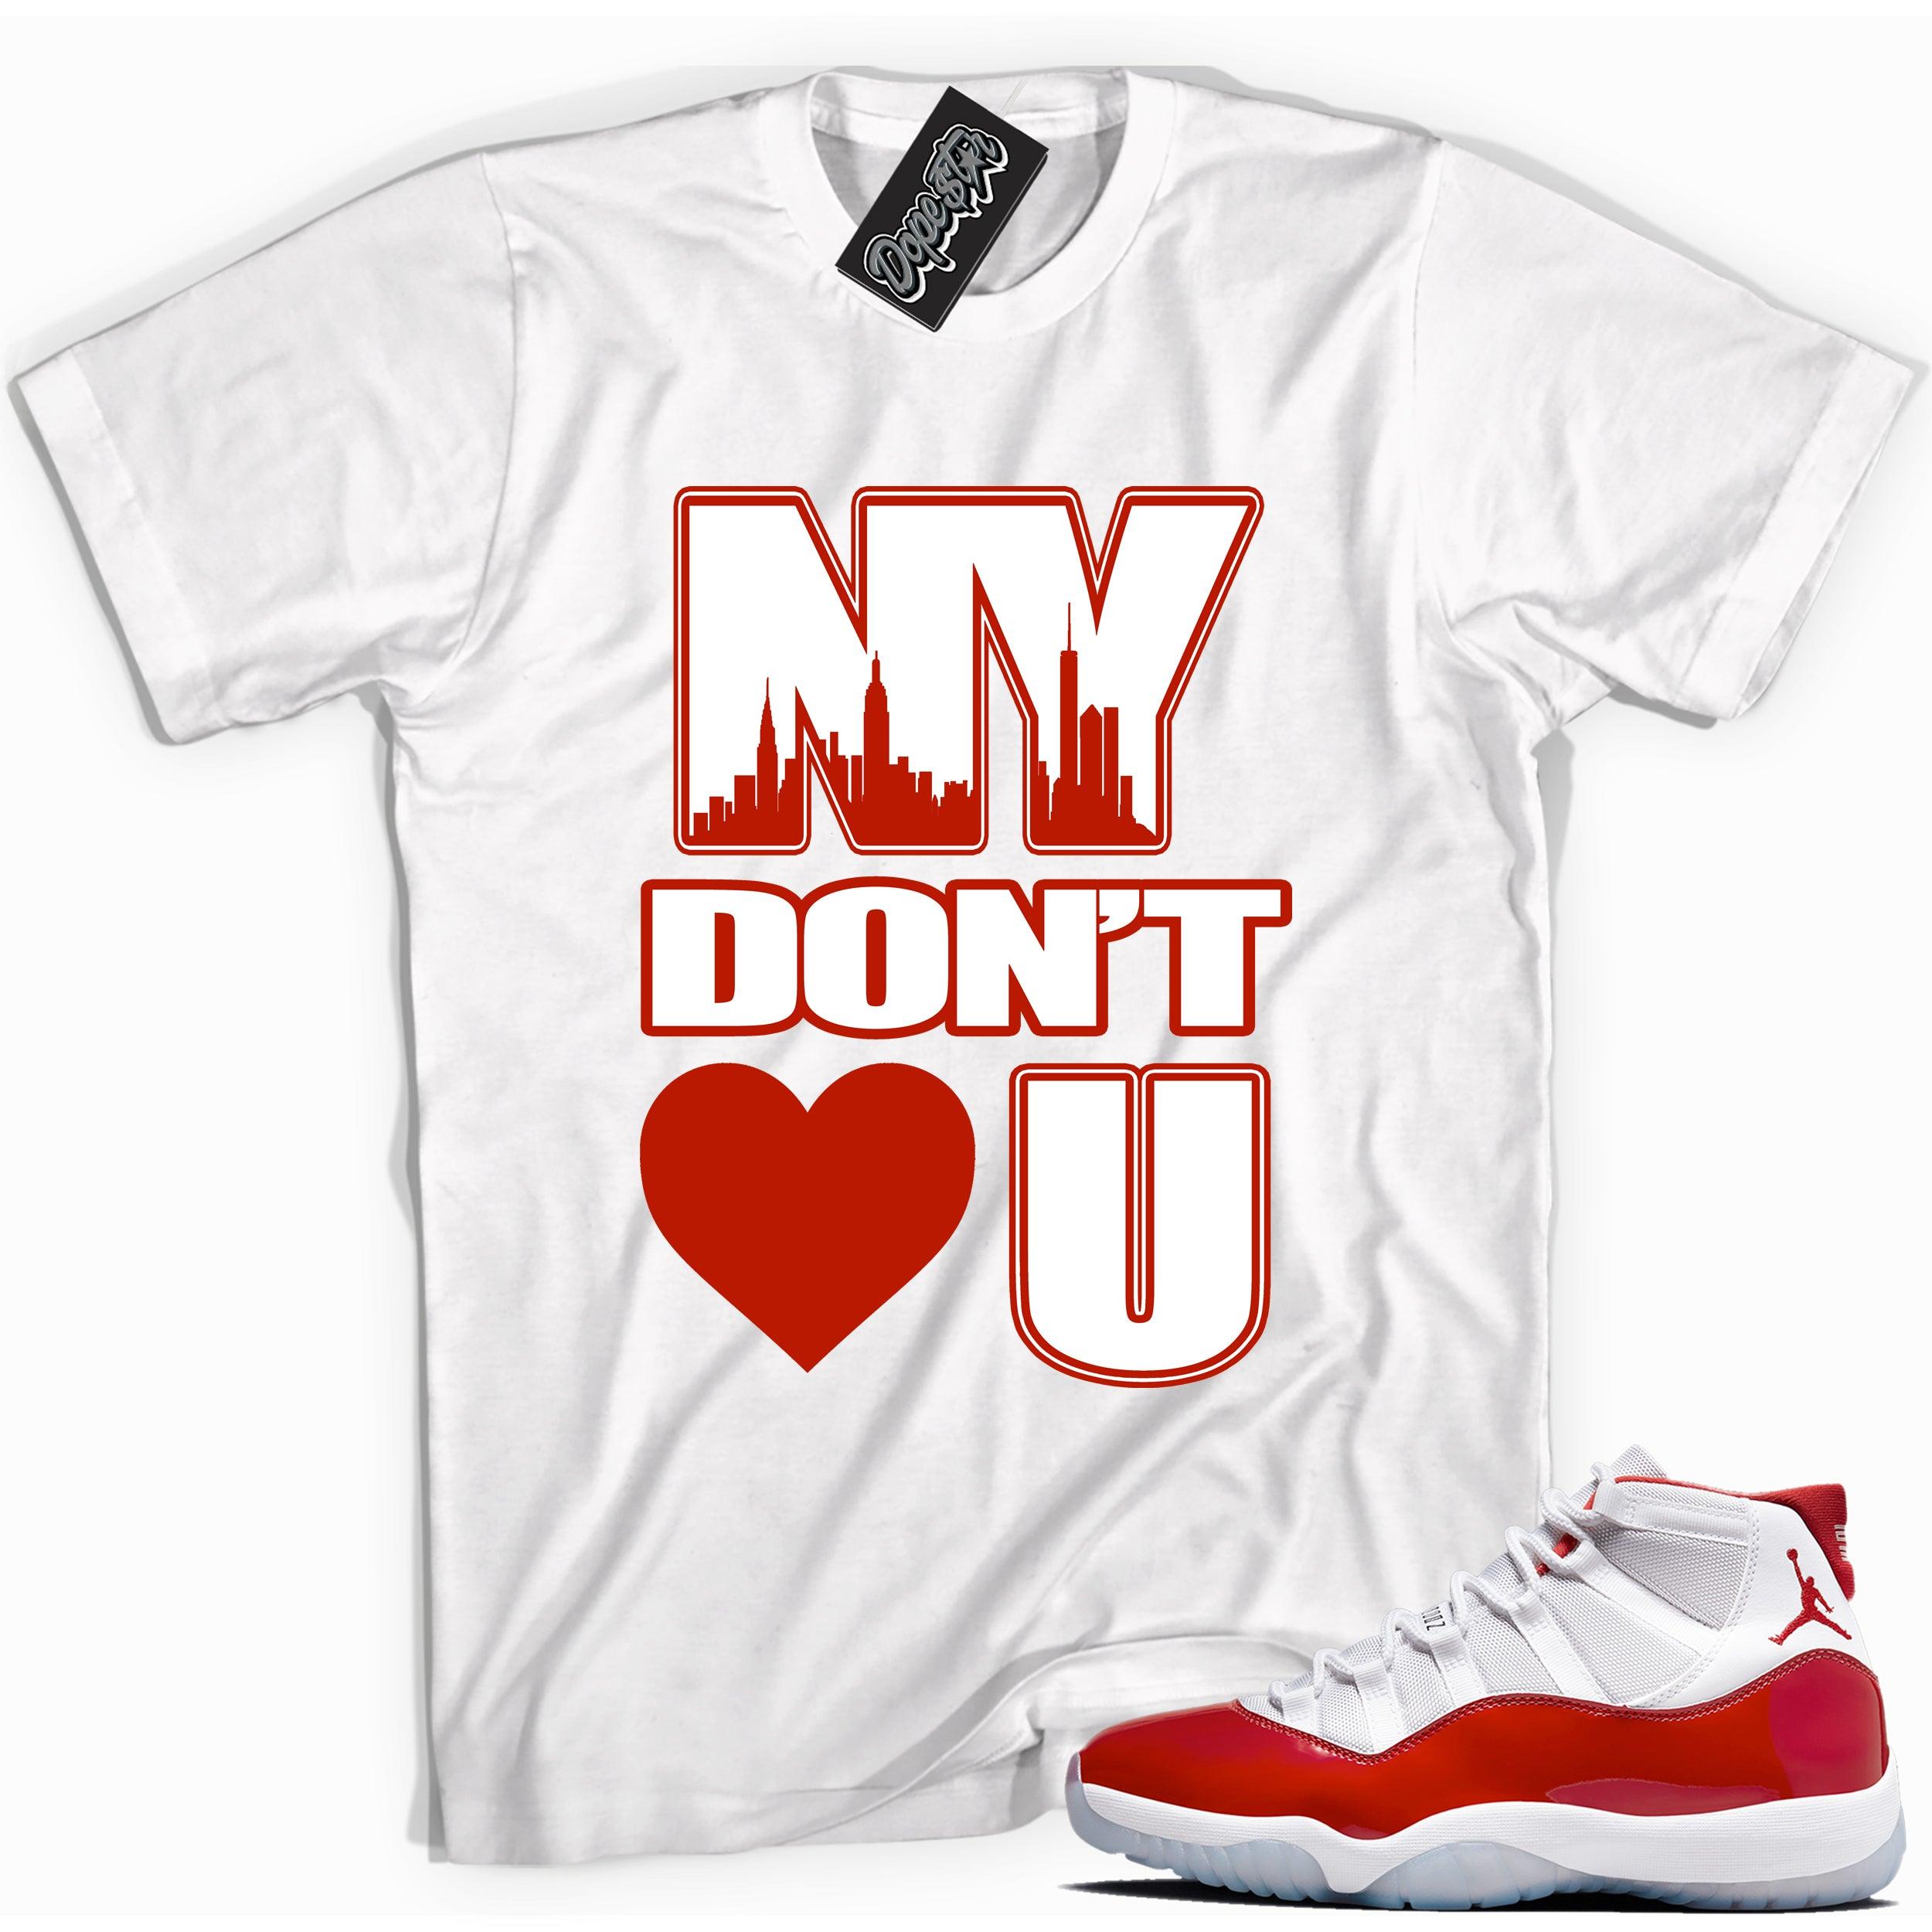 Cool White graphic tee with “ NY Don’t Love U ” print, that perfectly matches Air Jordan 11 Cherry sneakers 